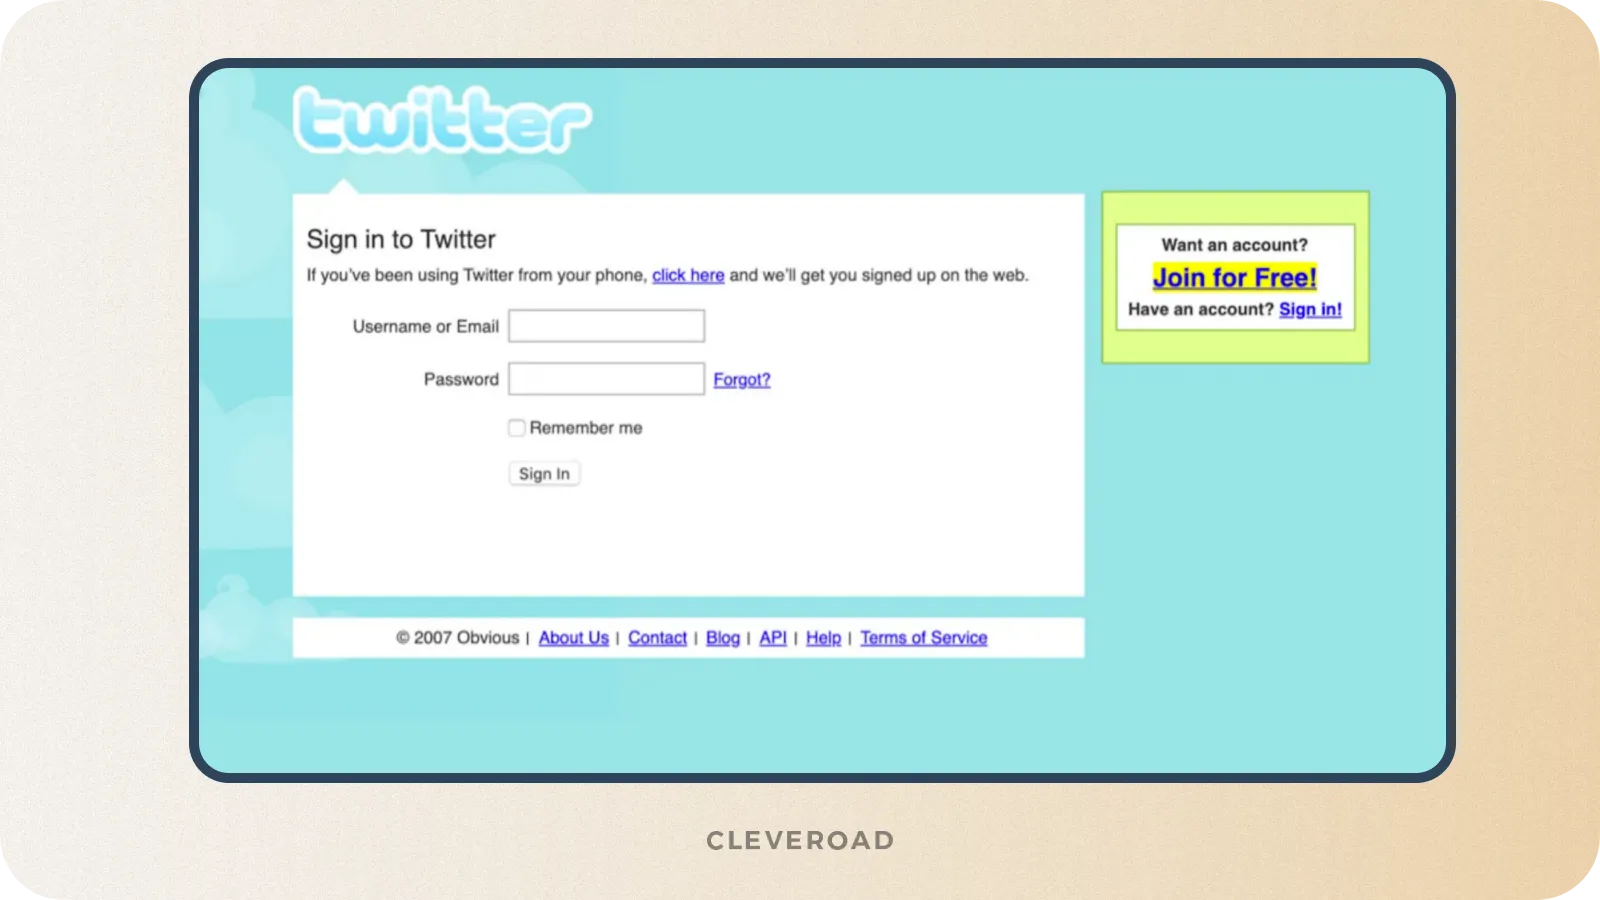 The very first design of twitter.com